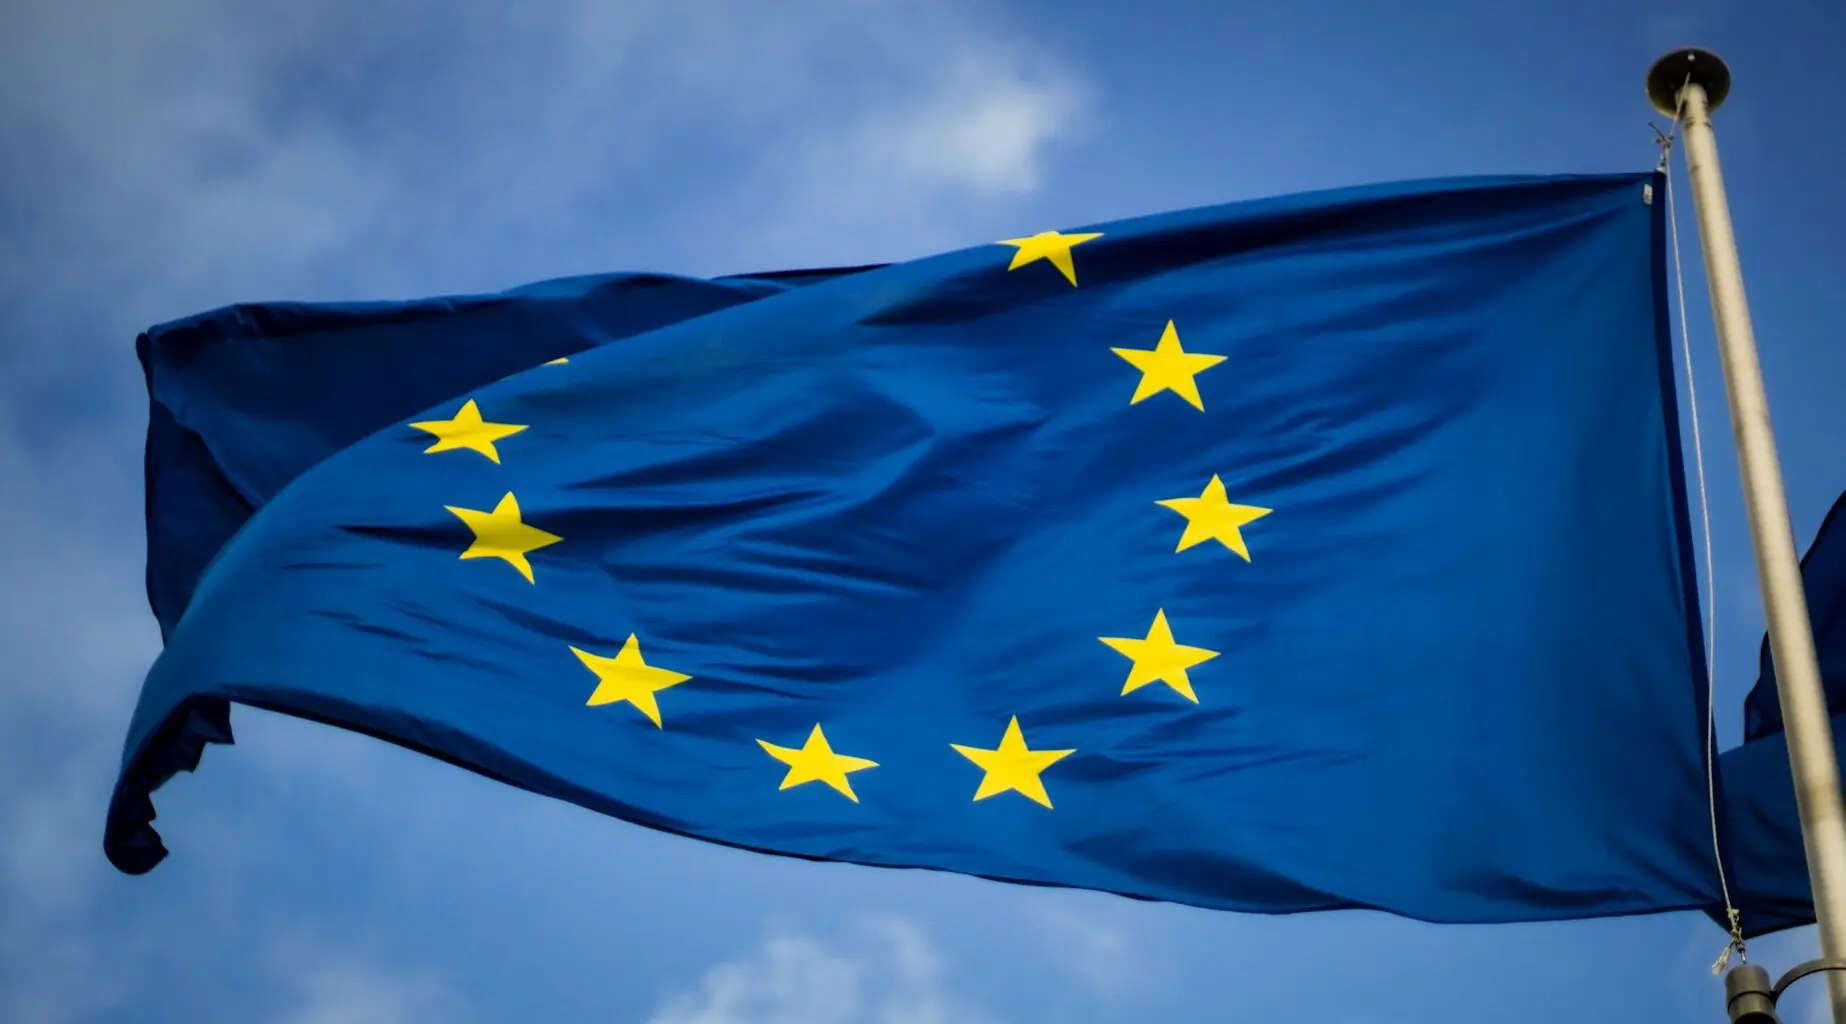 The image depicts the flag of the European Union (EU), featuring a circle of twelve gold stars on a blue background, fluttering against a partly cloudy sky.